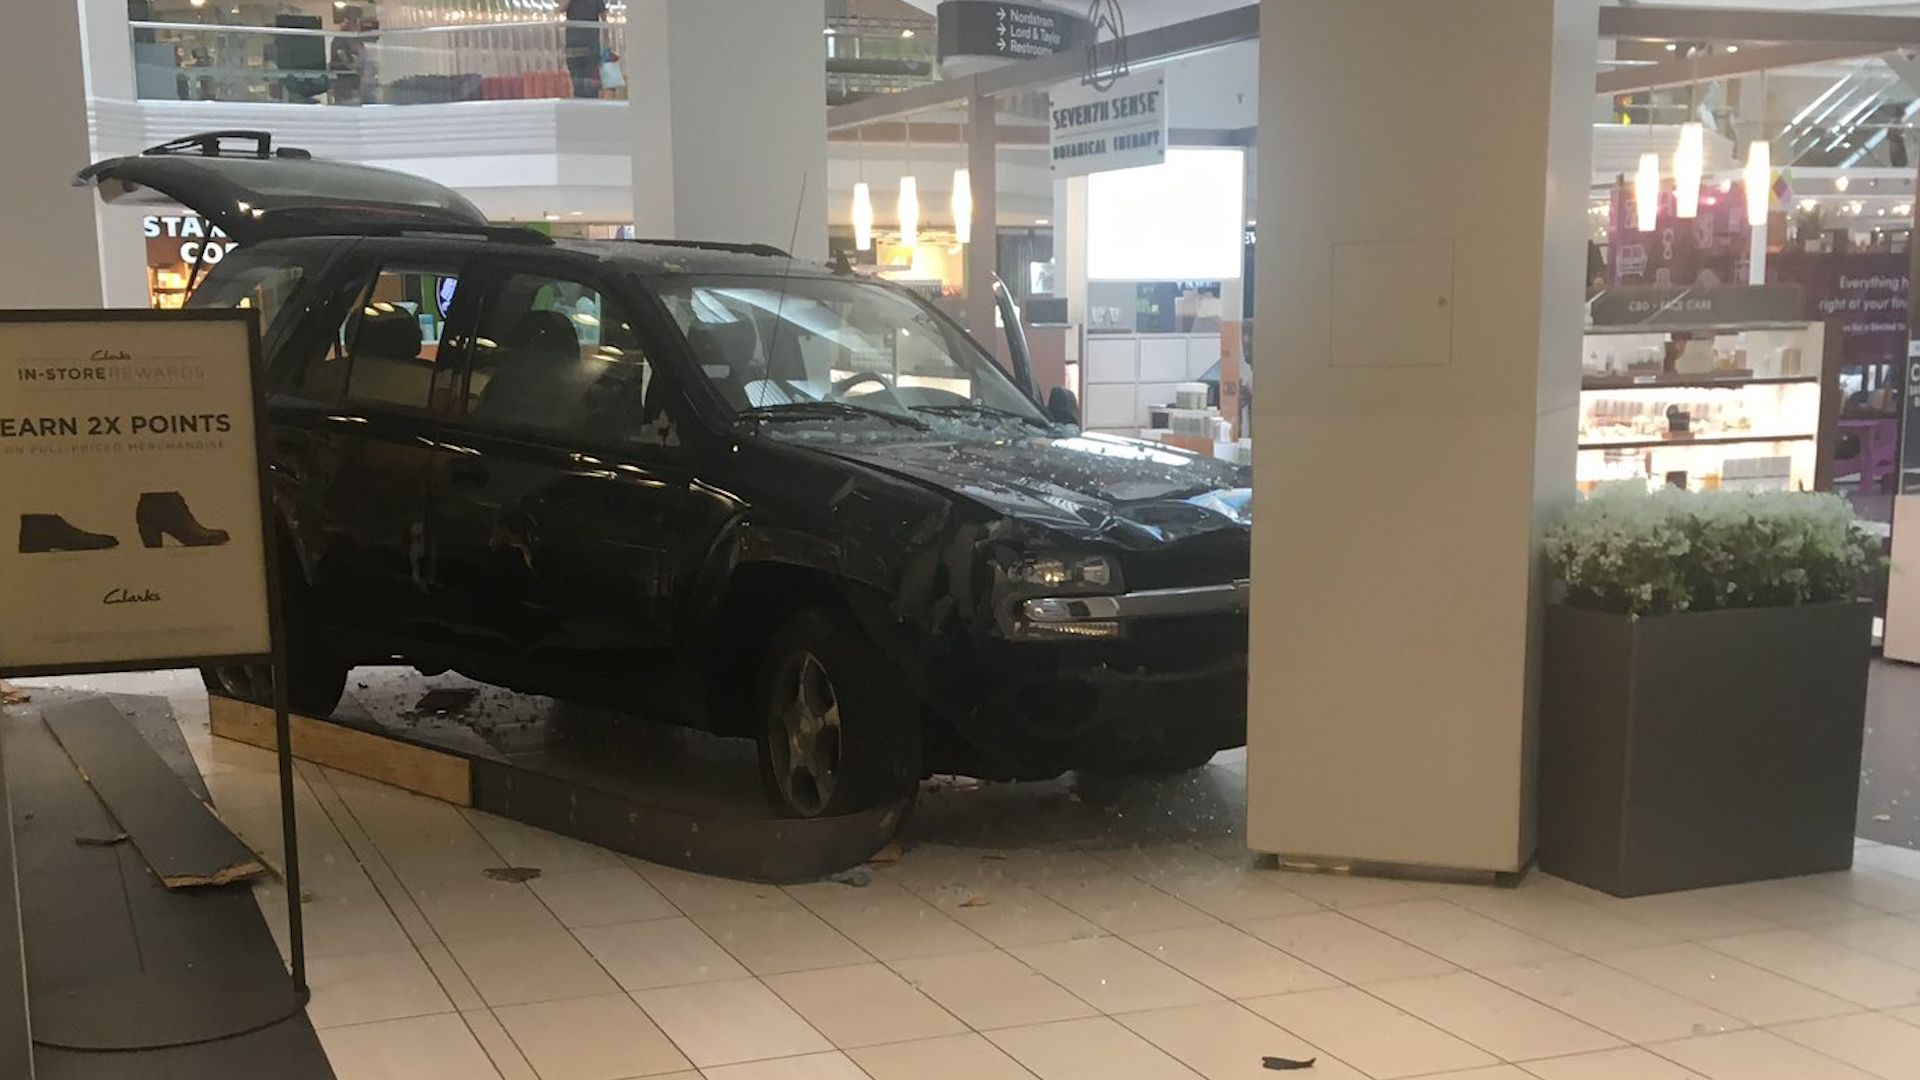 Woodfield Mall Chicago: 22-Year-Old Drove SUV Around Kiosks, Crashed Into  Walls